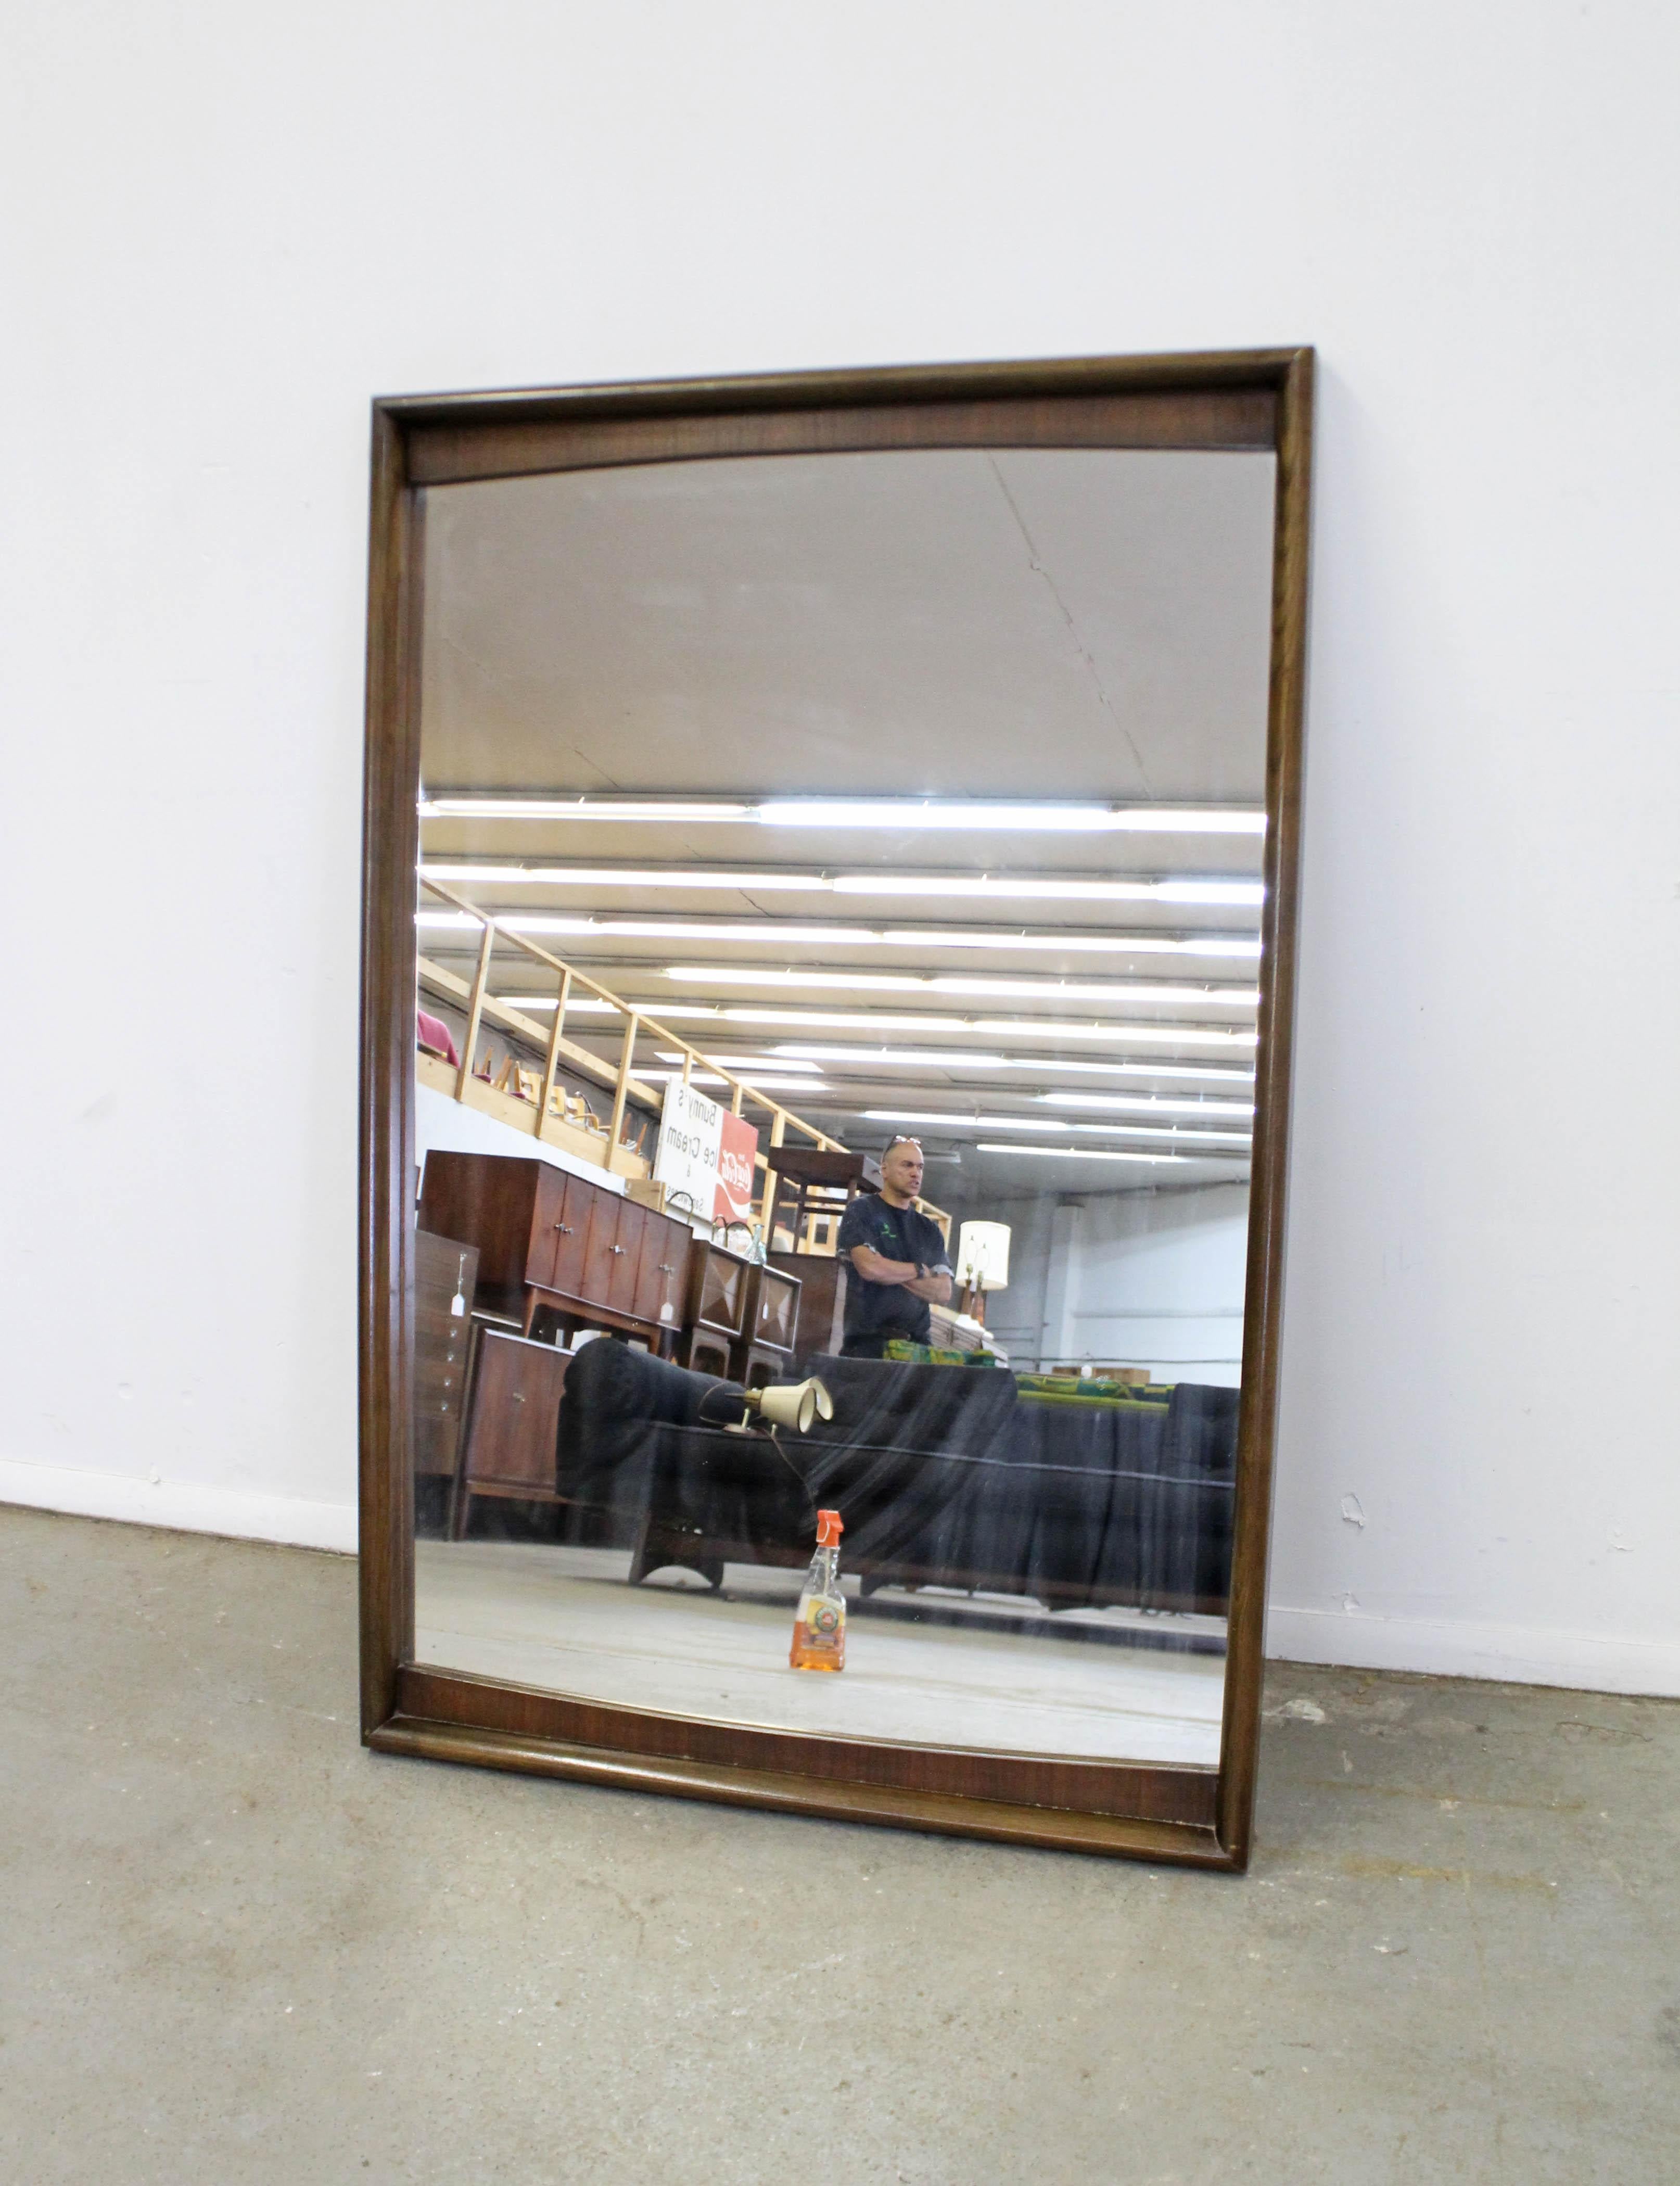 Offered is a vintage Mid-Century Modern wall mirror made by United Furniture. This piece is large and heavy with a walnut frame. It is in good condition shows minor wear including small nicks and scratches on the wood. Does not include a hanger. It